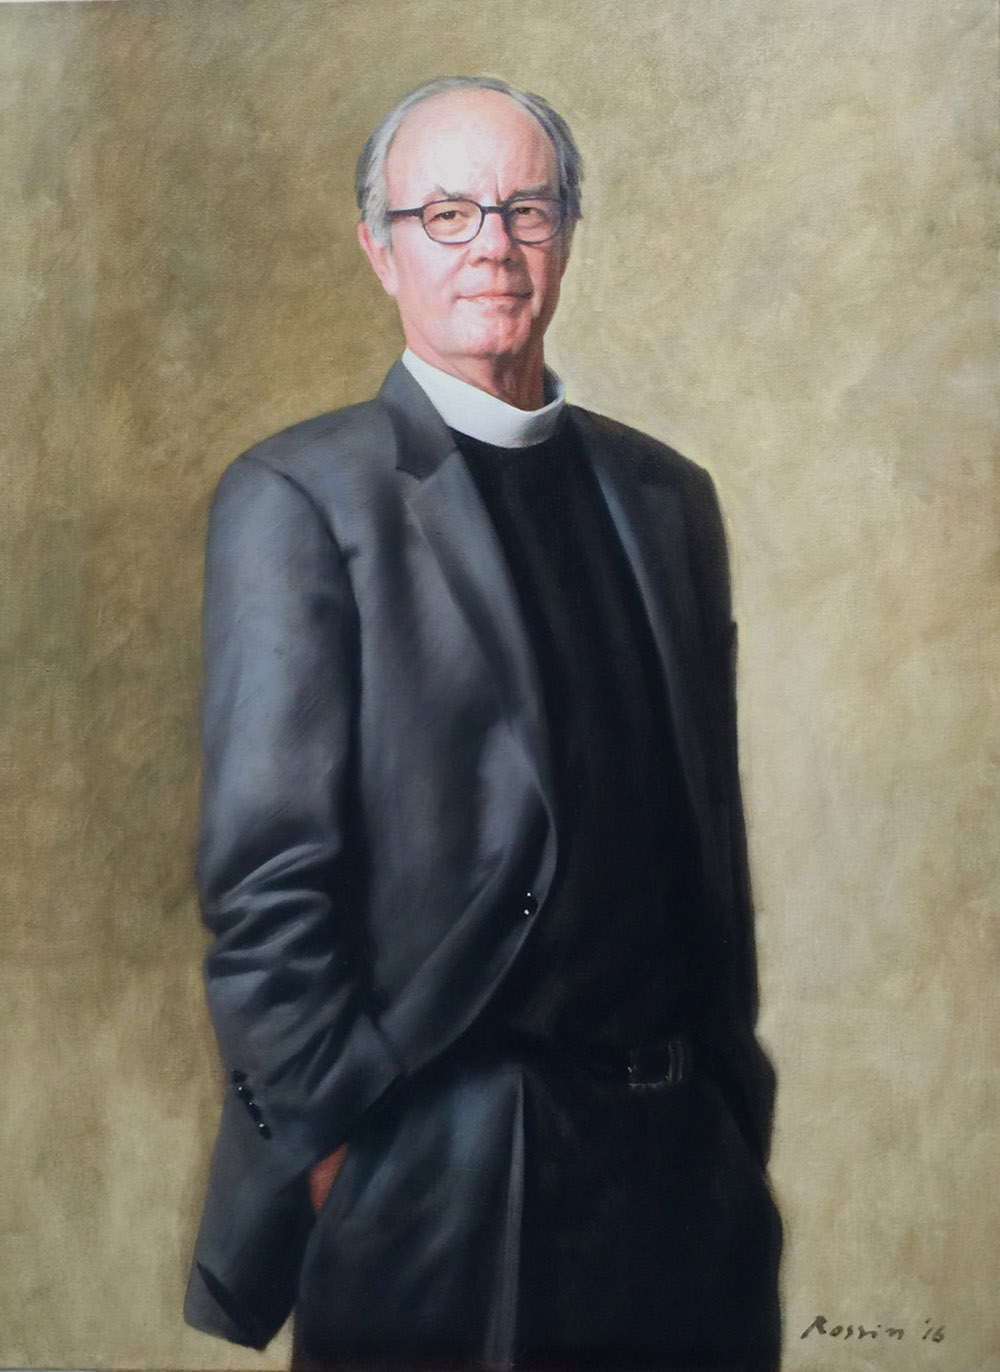 Ross Rossin Portrait Artist in Atlanta's Oil Painting of Father Hoare Portraiture, USA